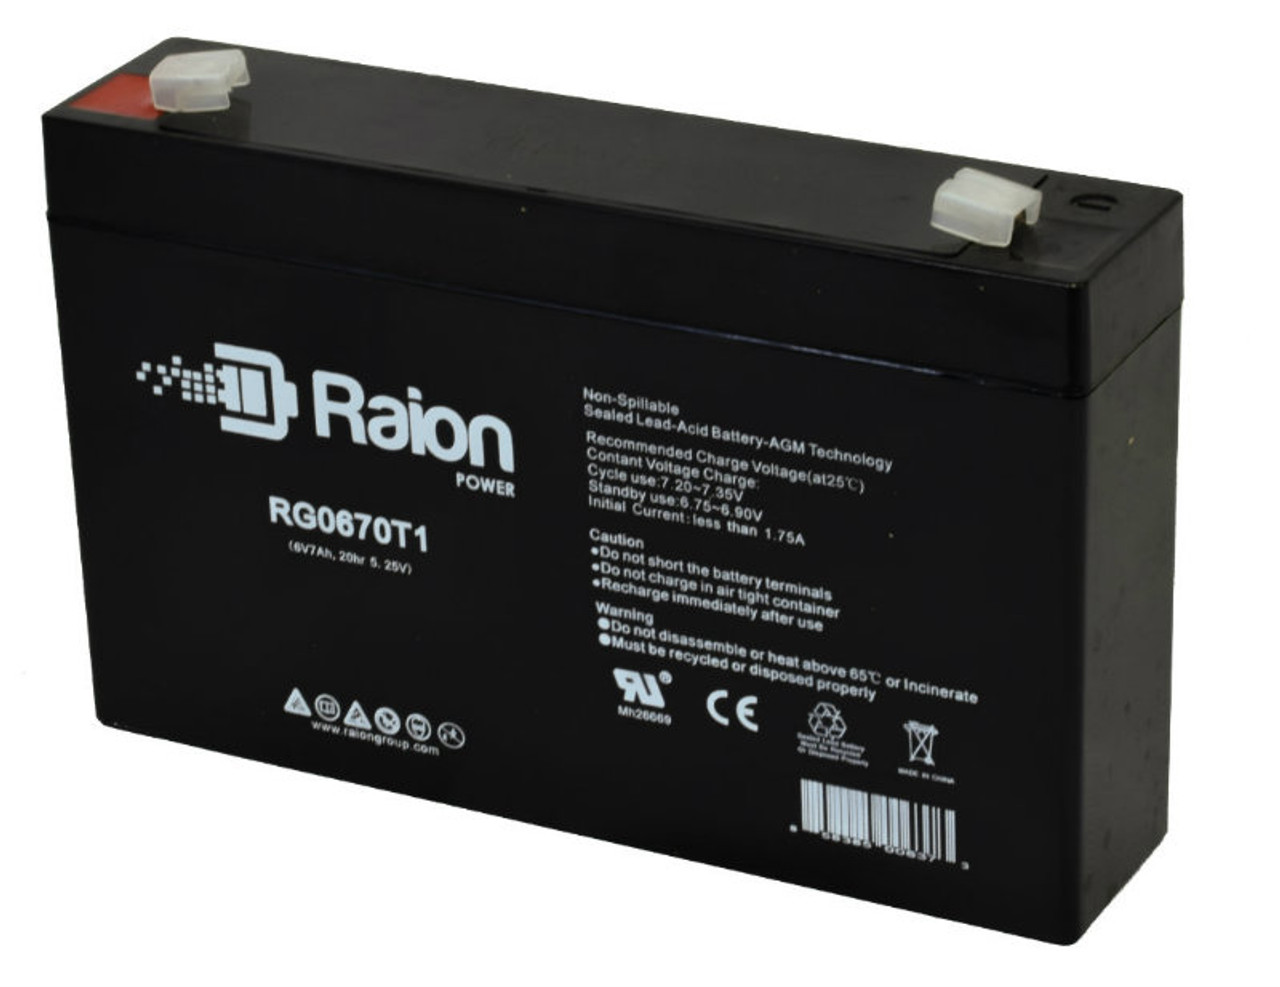 Raion Power RG0670T1 6V 7Ah Replacement Emergency Light Battery for Light Alarms PL3